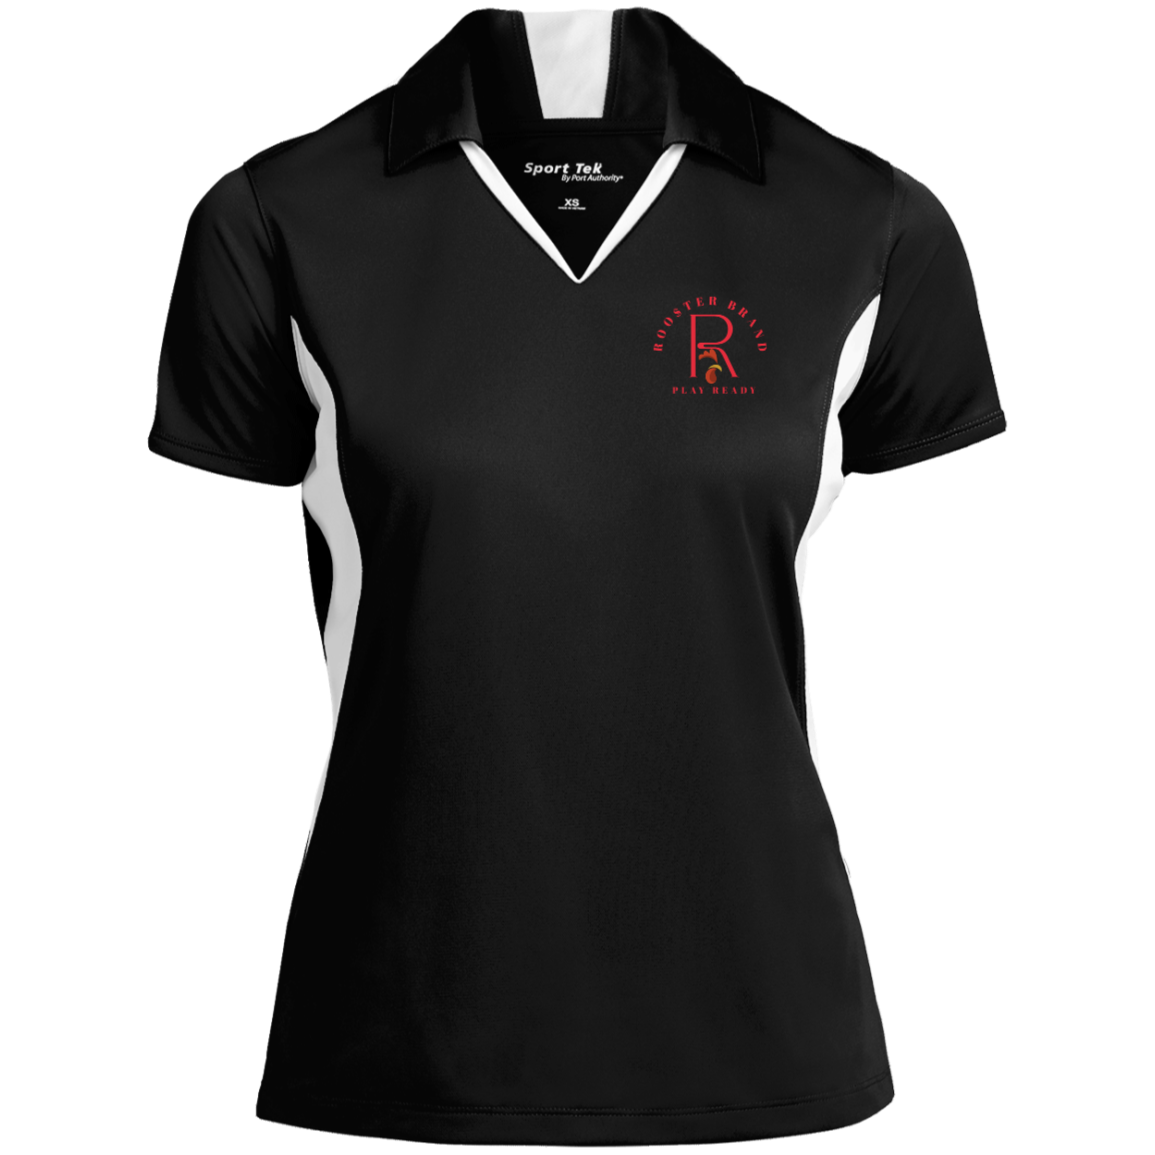 Roo$ter  Brand Ladies' Colorblock Performance Polo